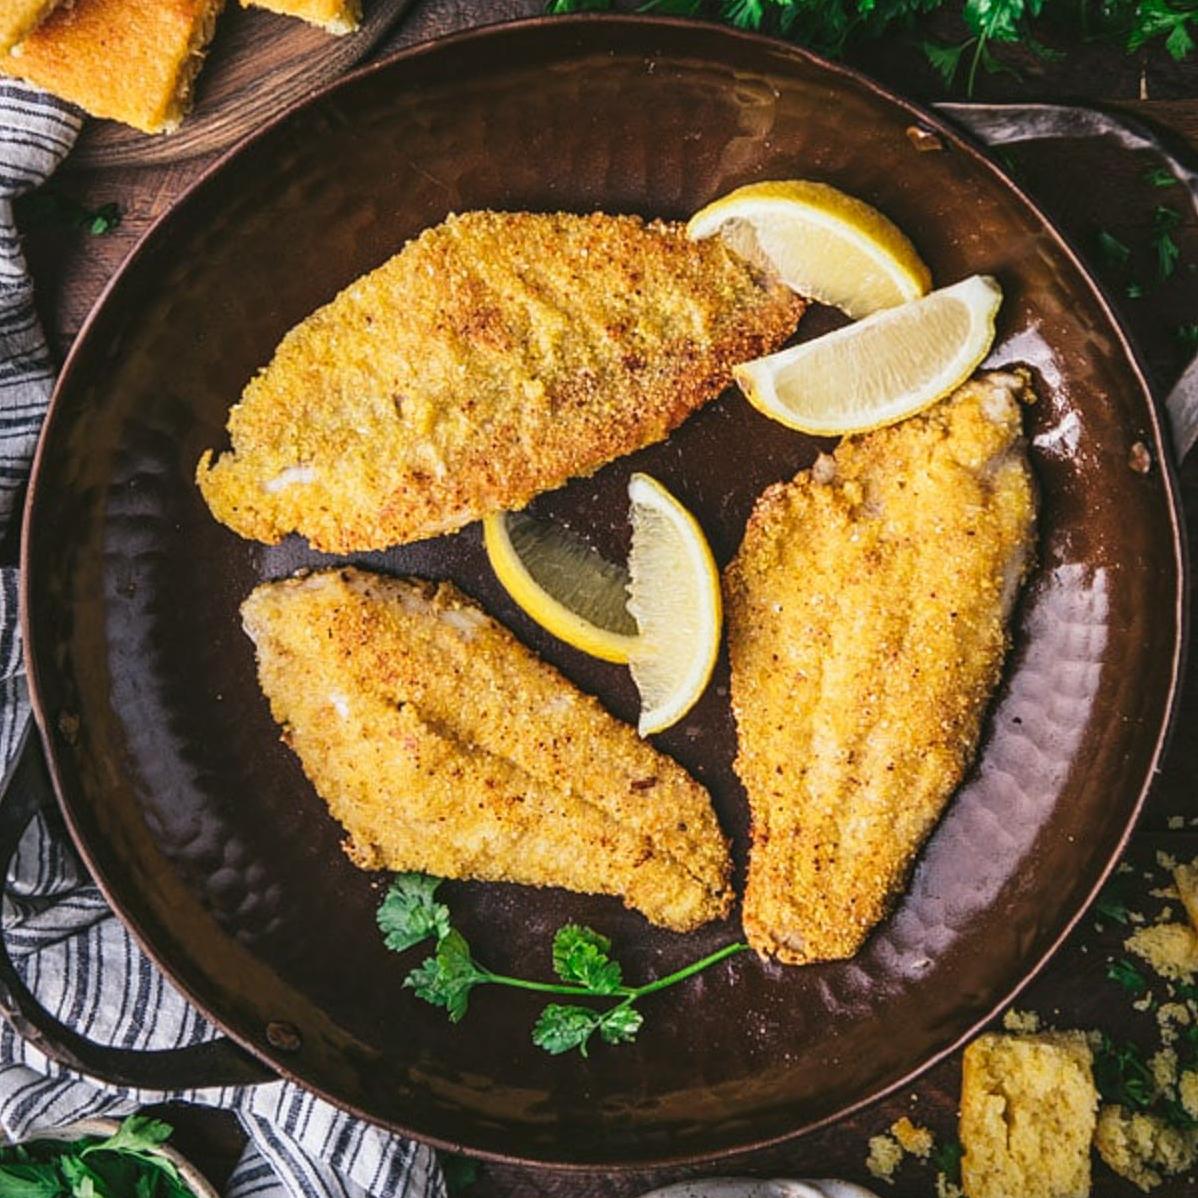  Once you drop your catfish in the hot oil, leave it alone! No need to fuss with it while it cooks.